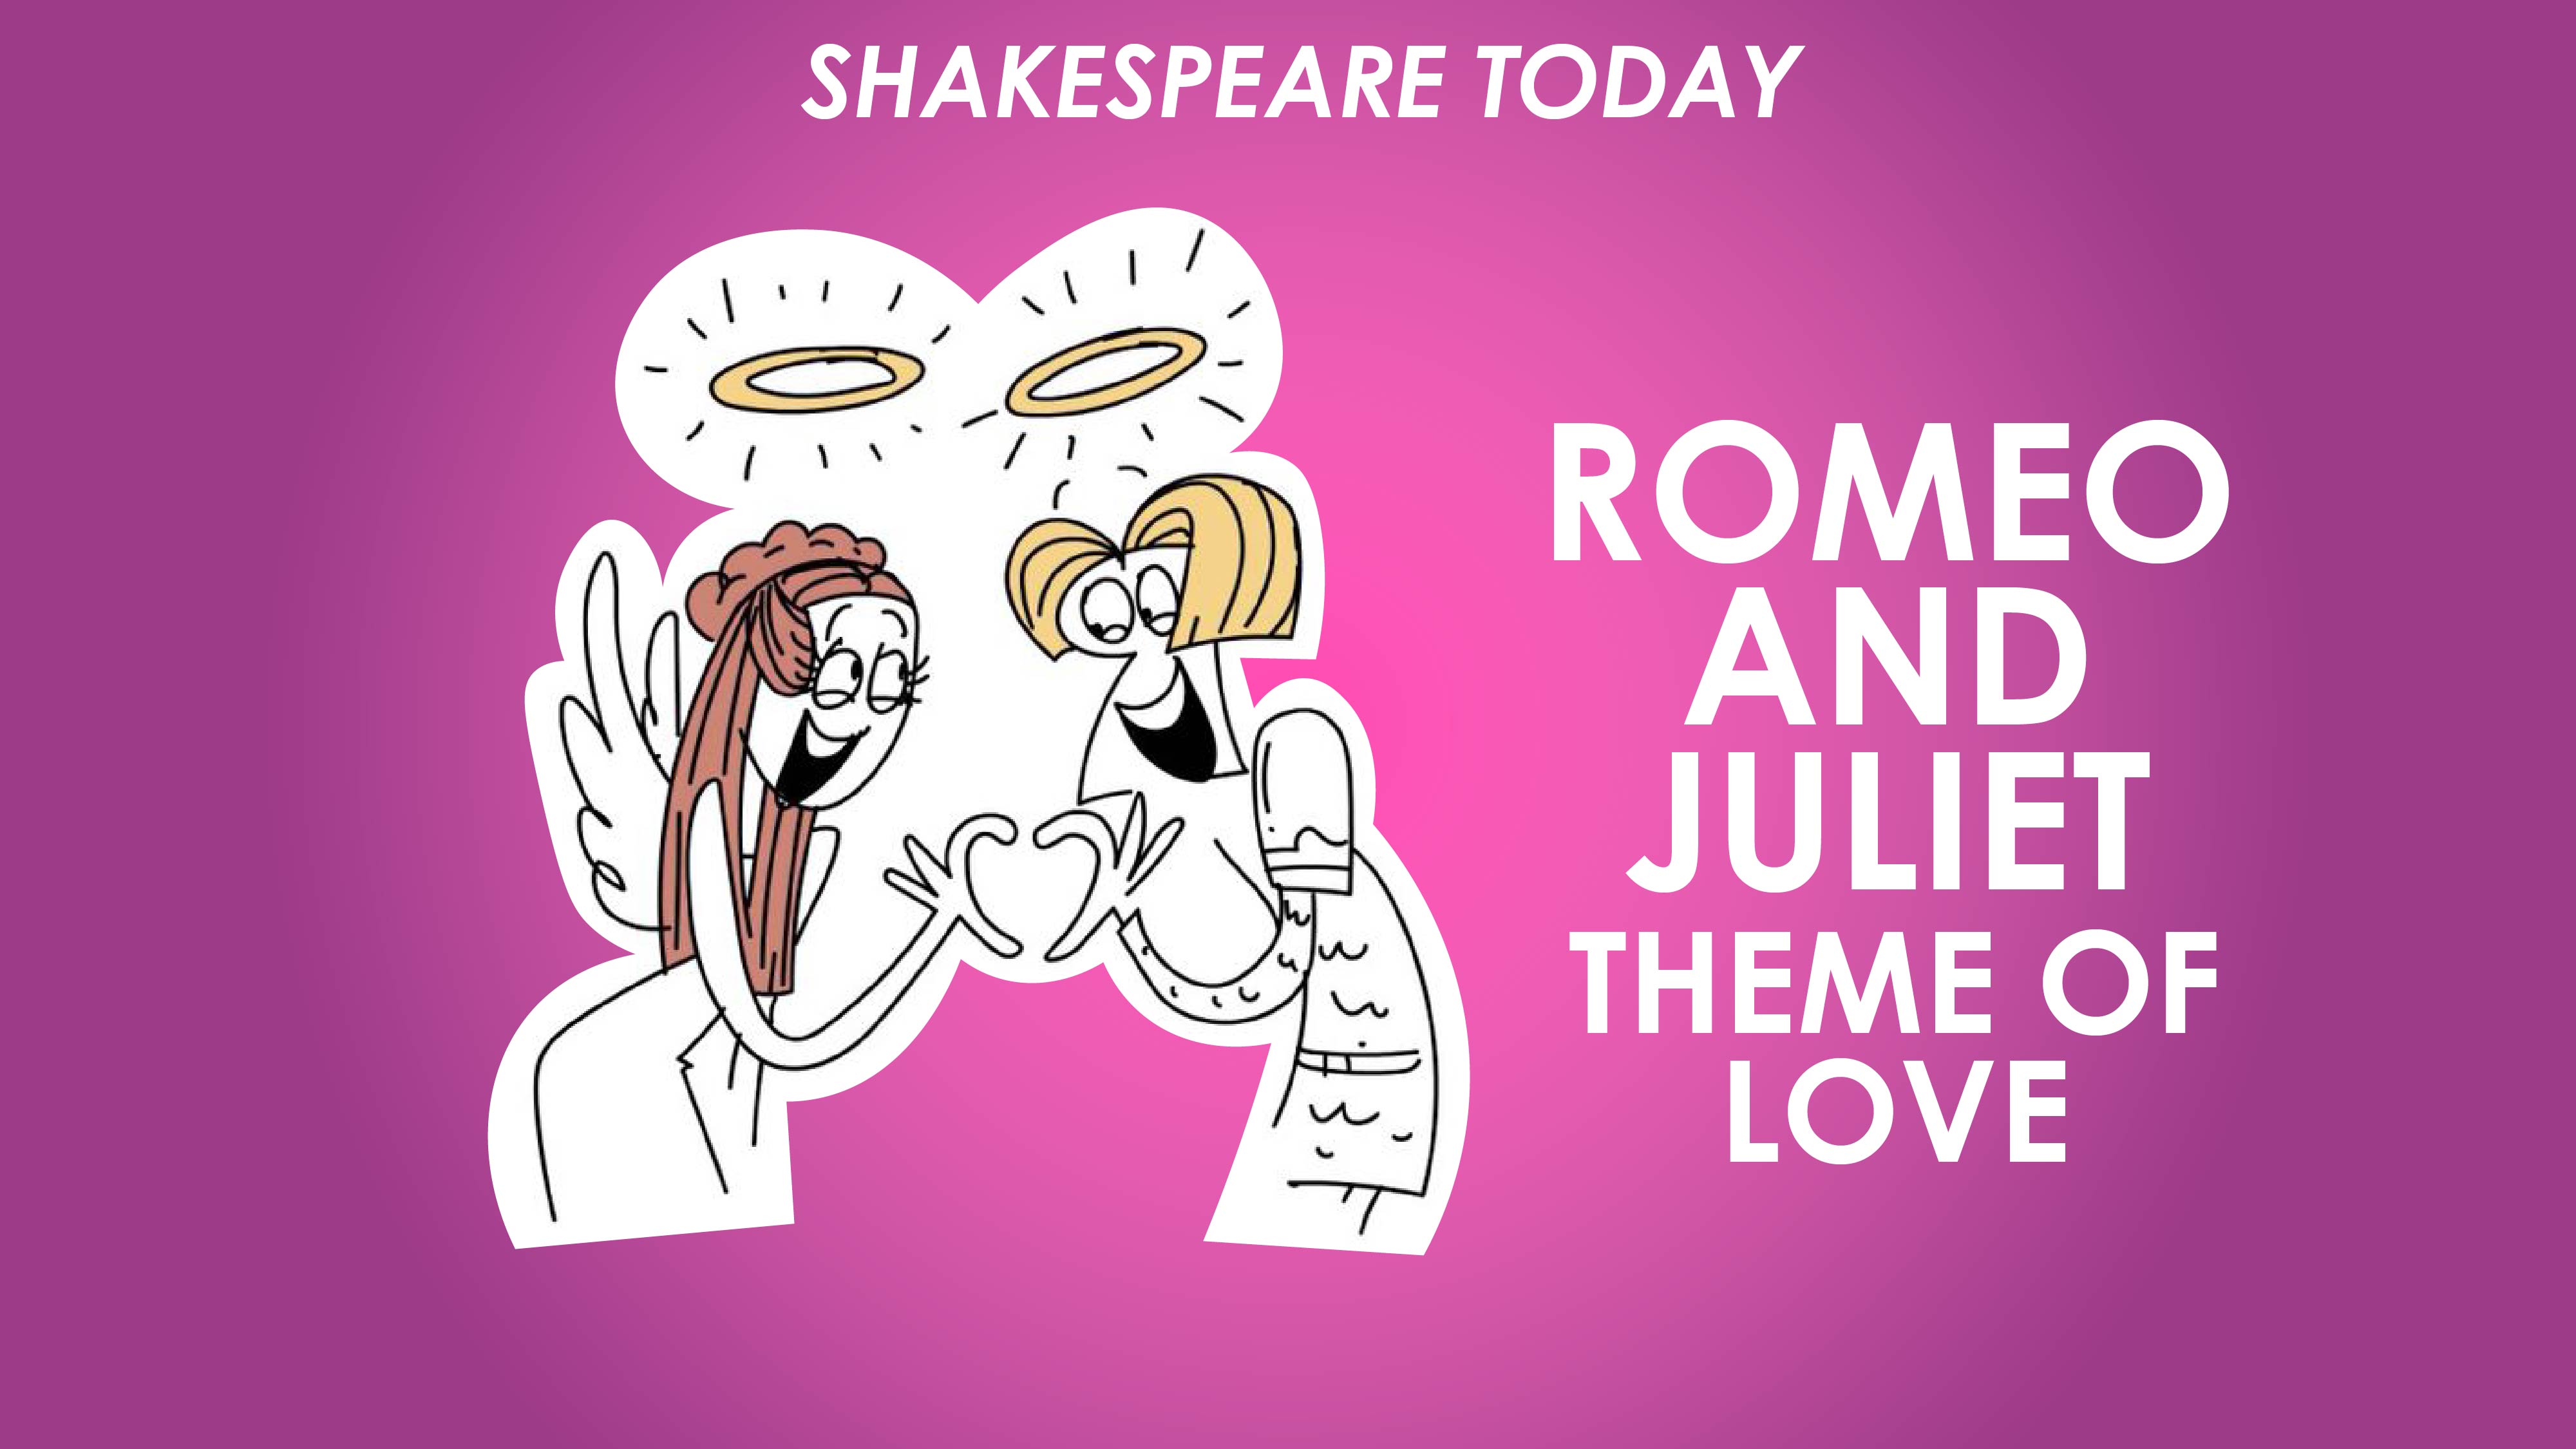 Romeo and Juliet Theme of Love - Shakespeare Today Series